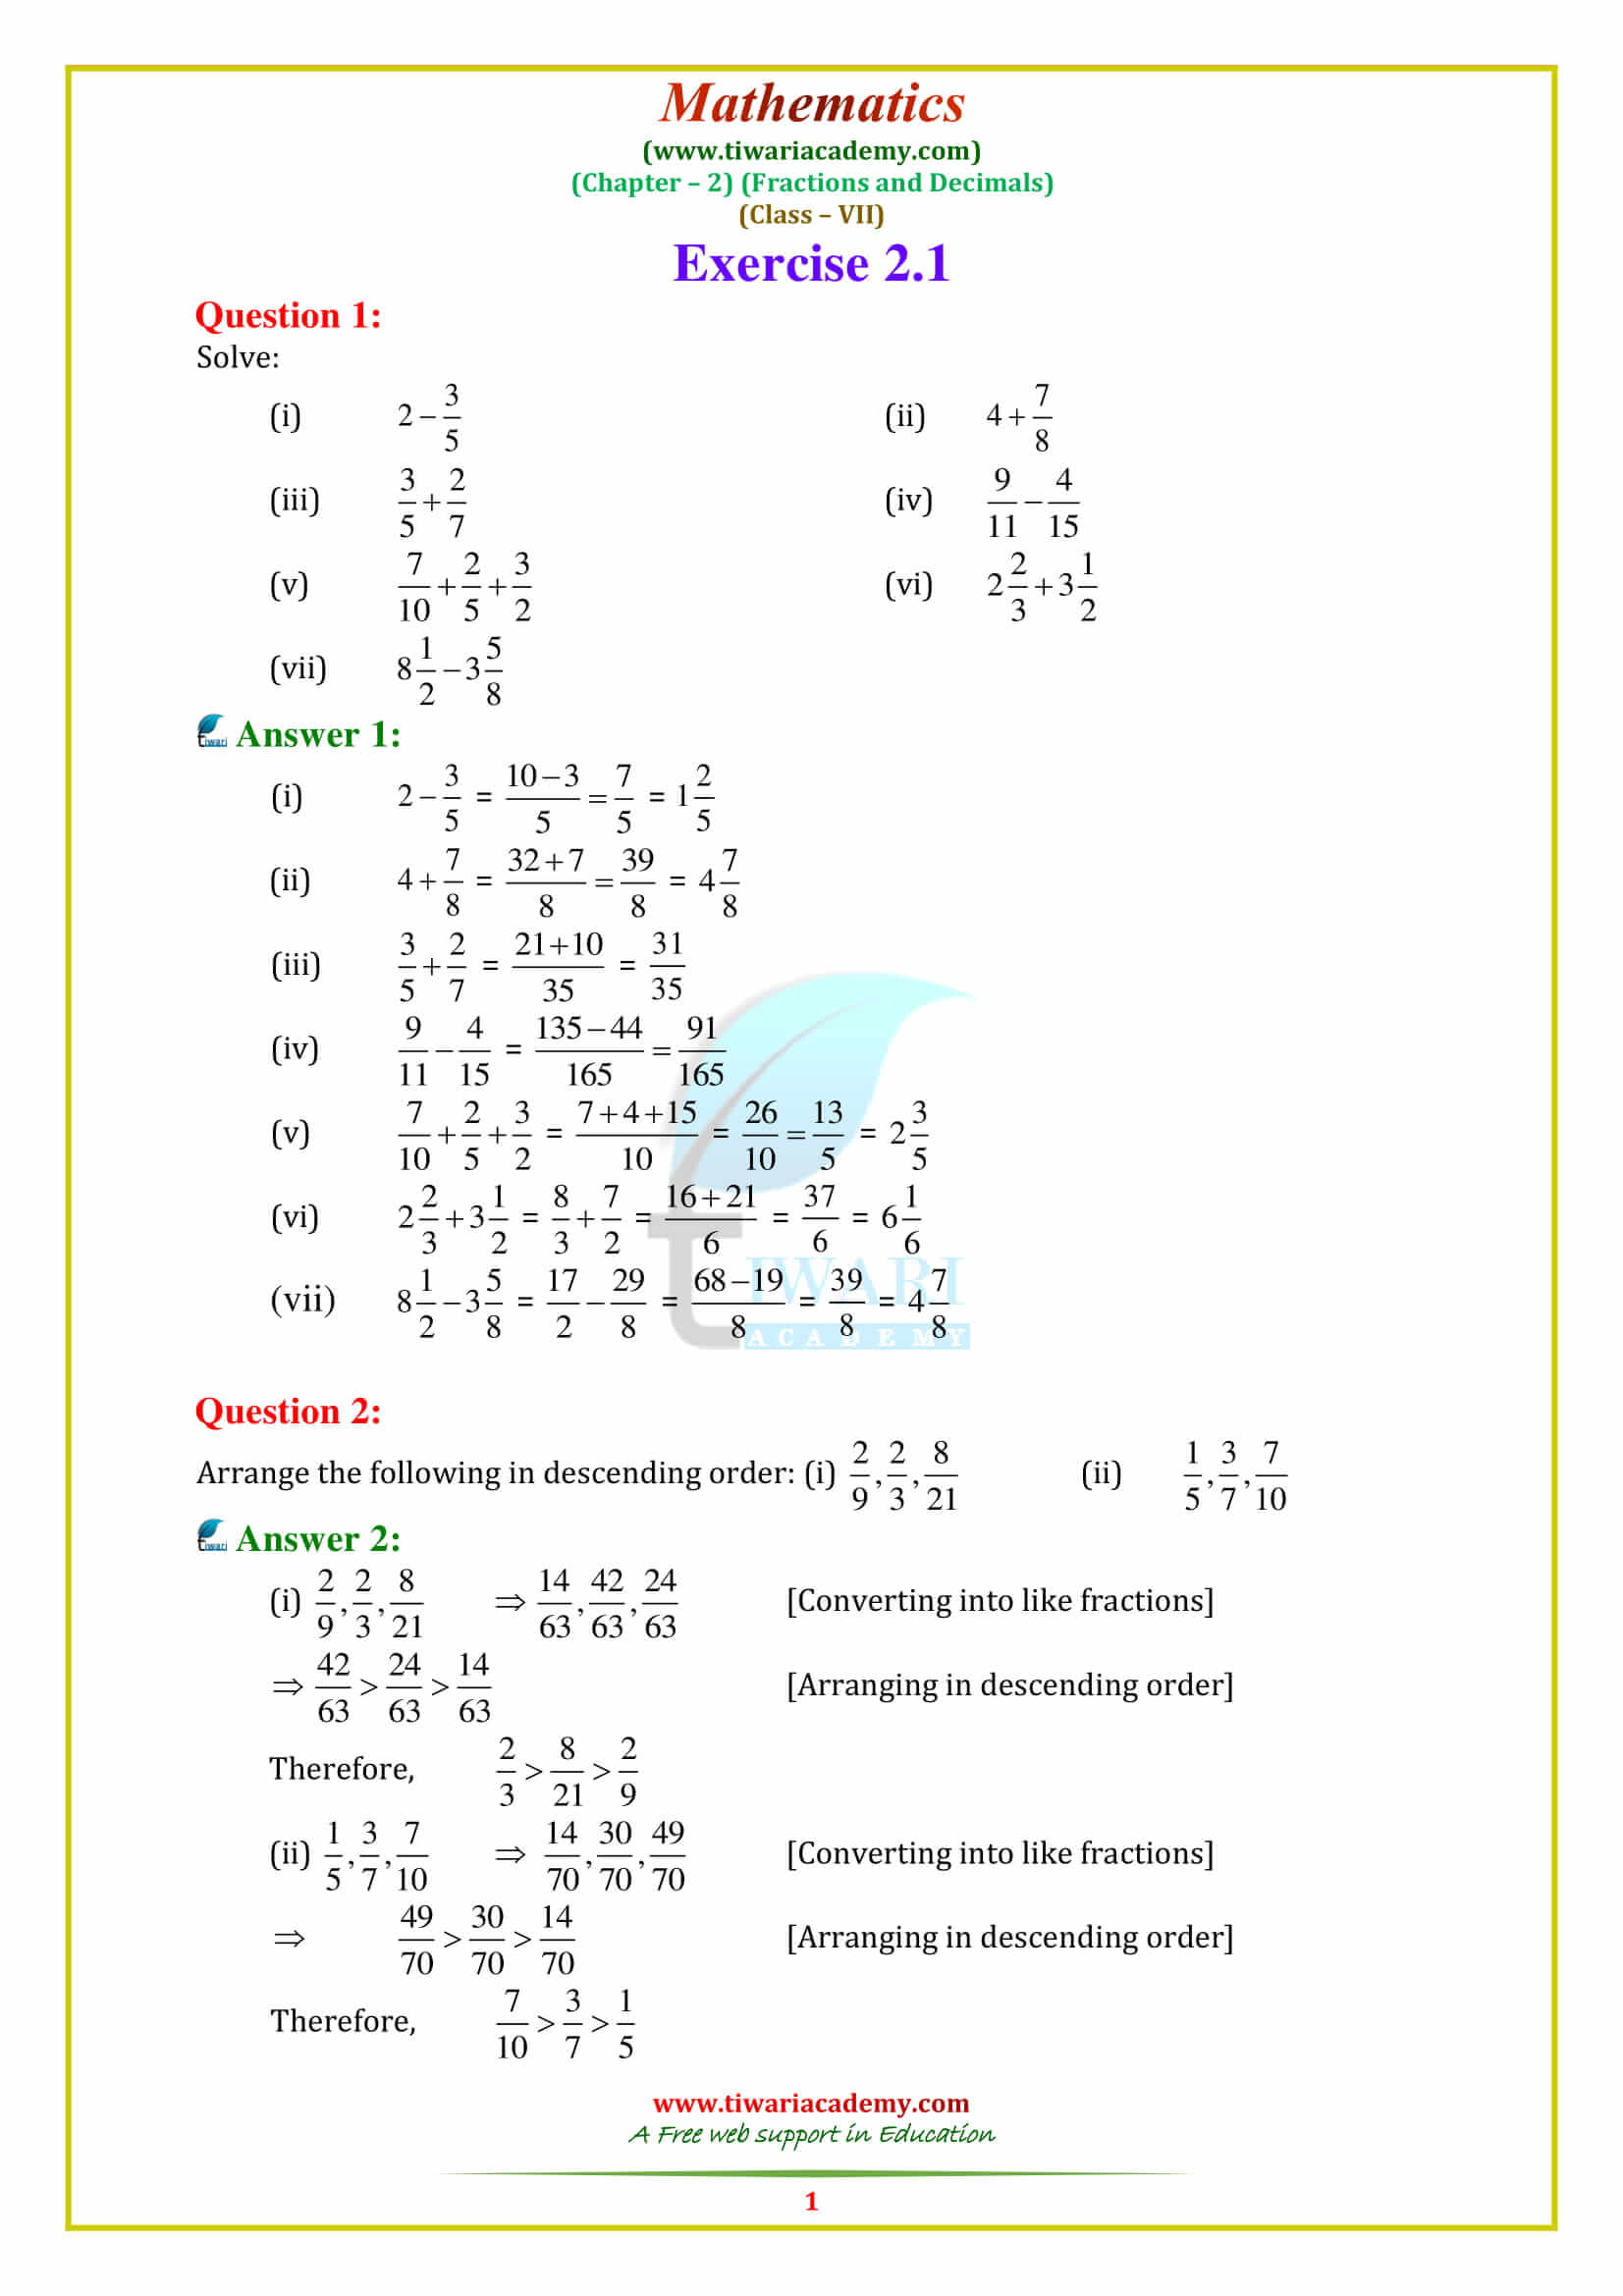 cbse-ncert-class-7-maths-chapter-2-exercise-2-1-solution-for-2022-2023